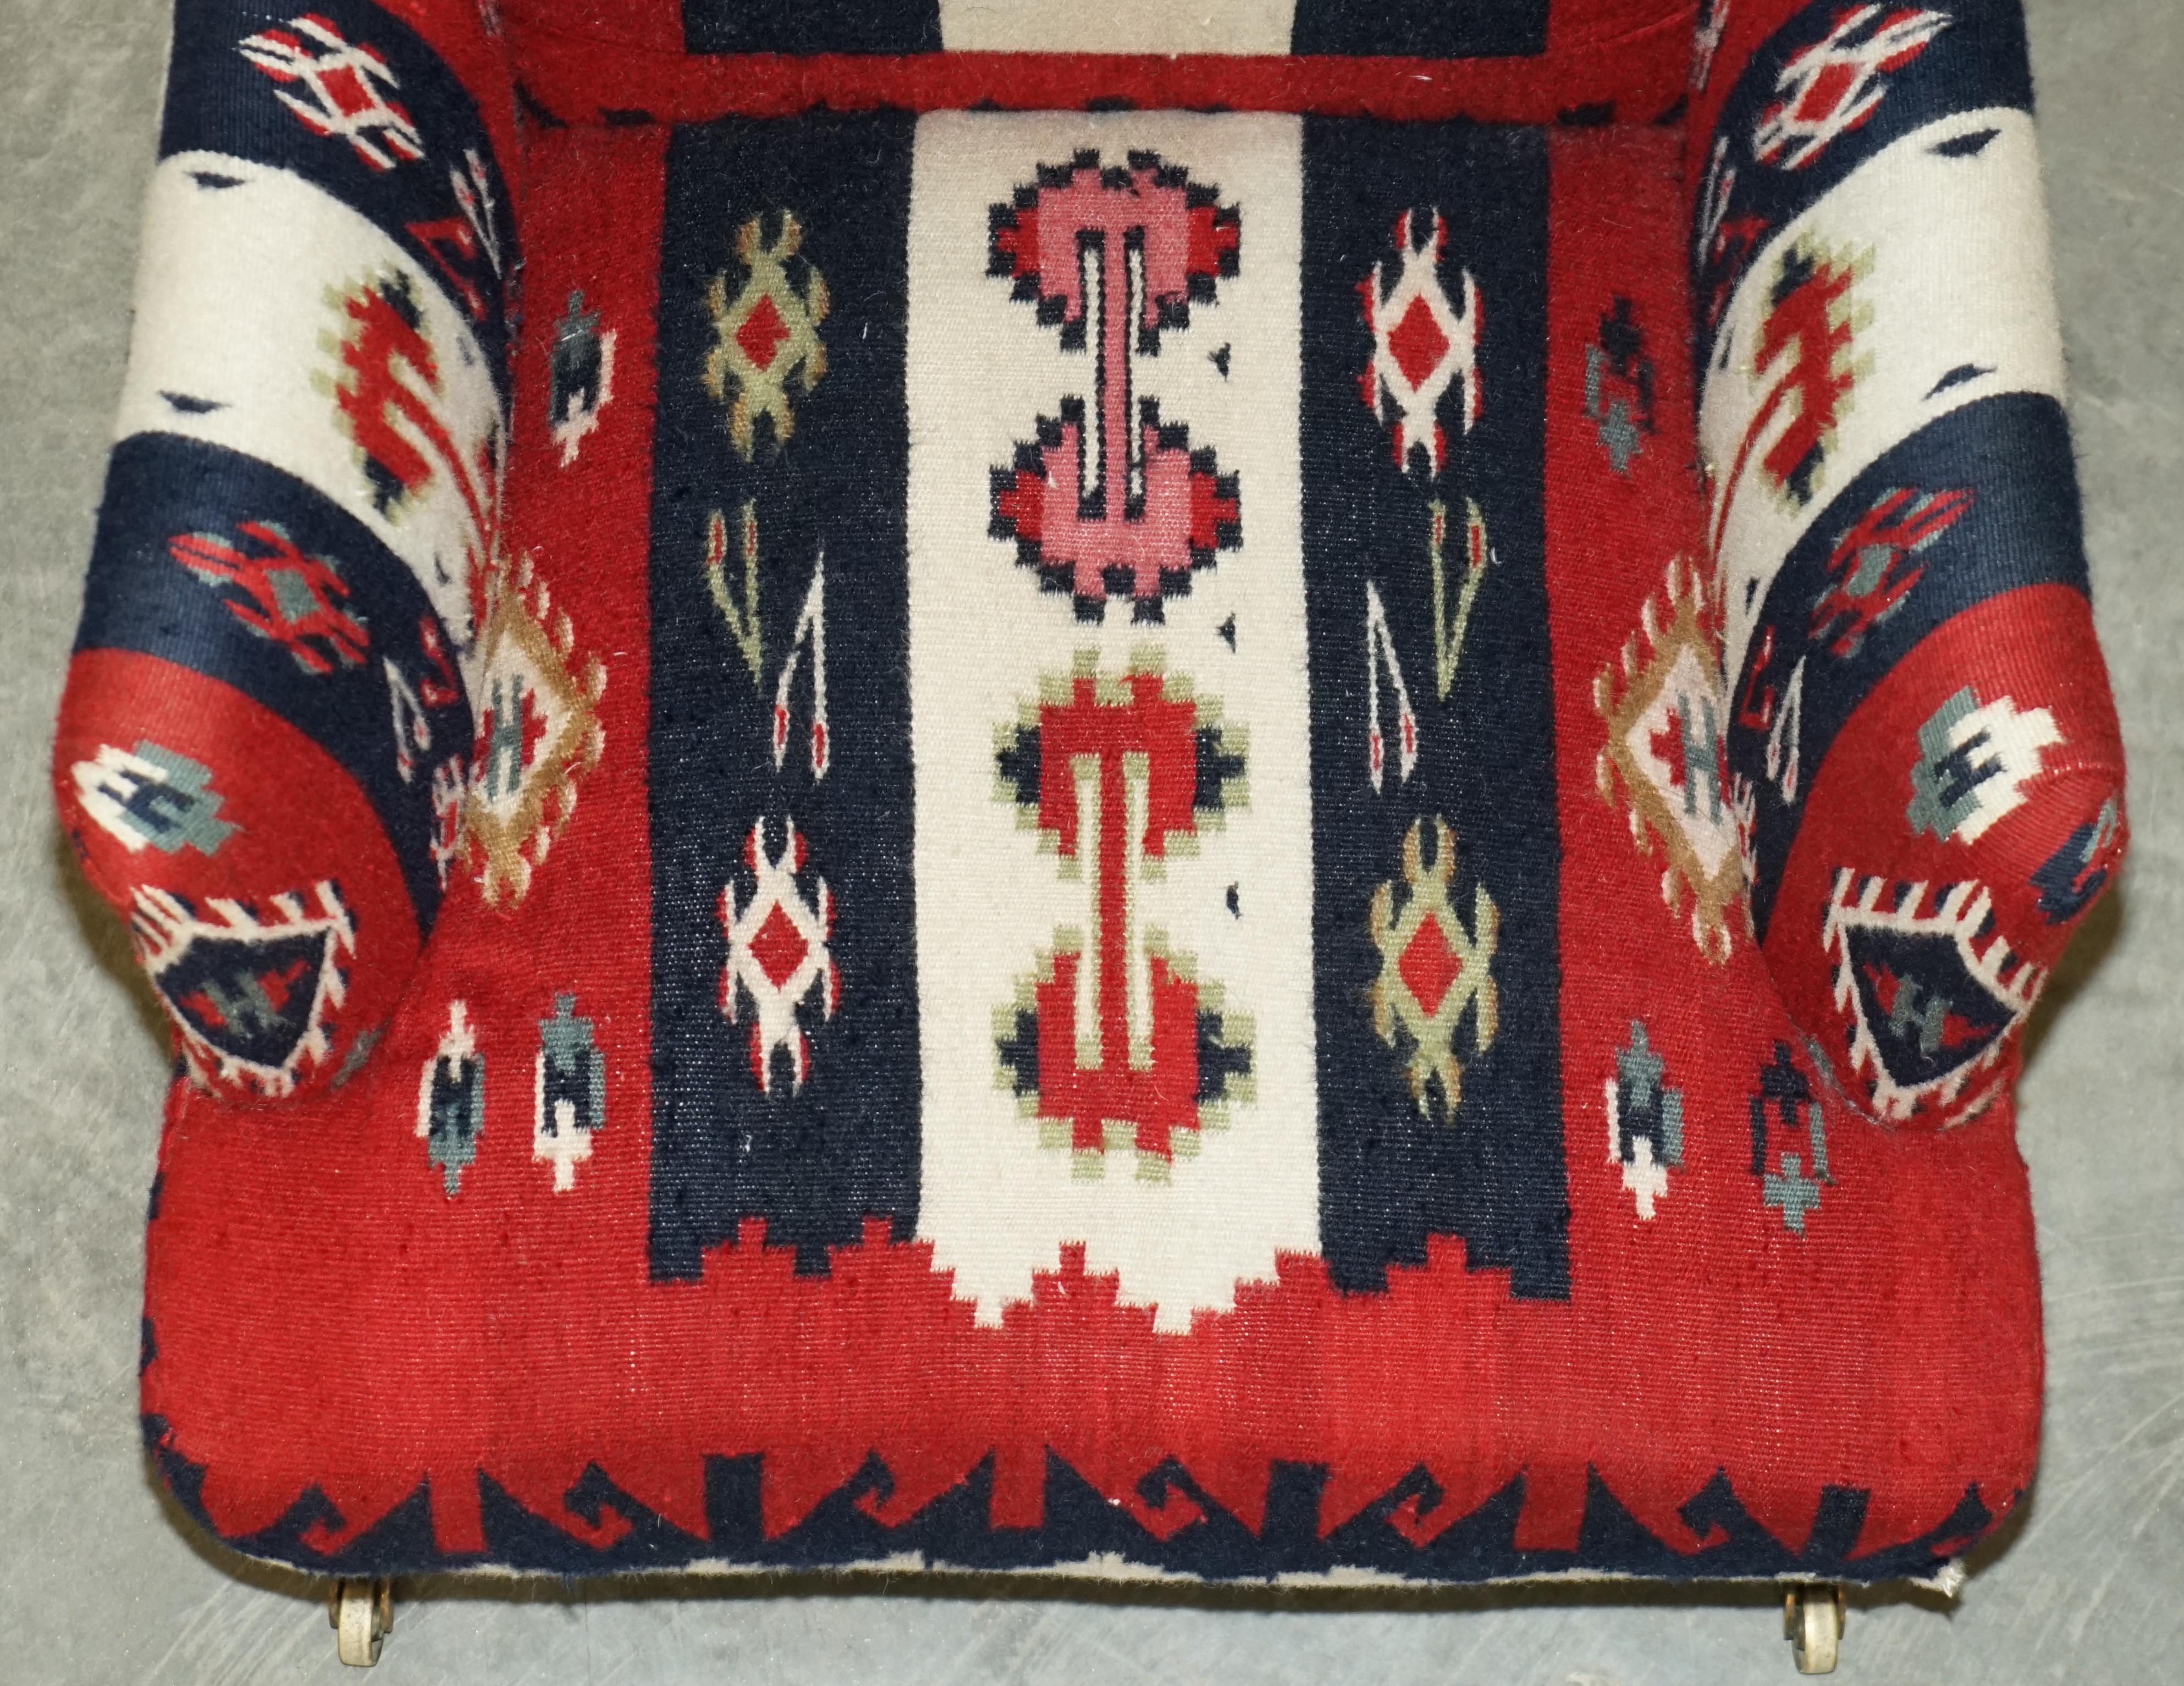 RARE ORIGINAL ViCTORIAN HOWARD & SONS BRIDGEWATER ARMCHAIR WITH KILIM UPHOLSTERY For Sale 7